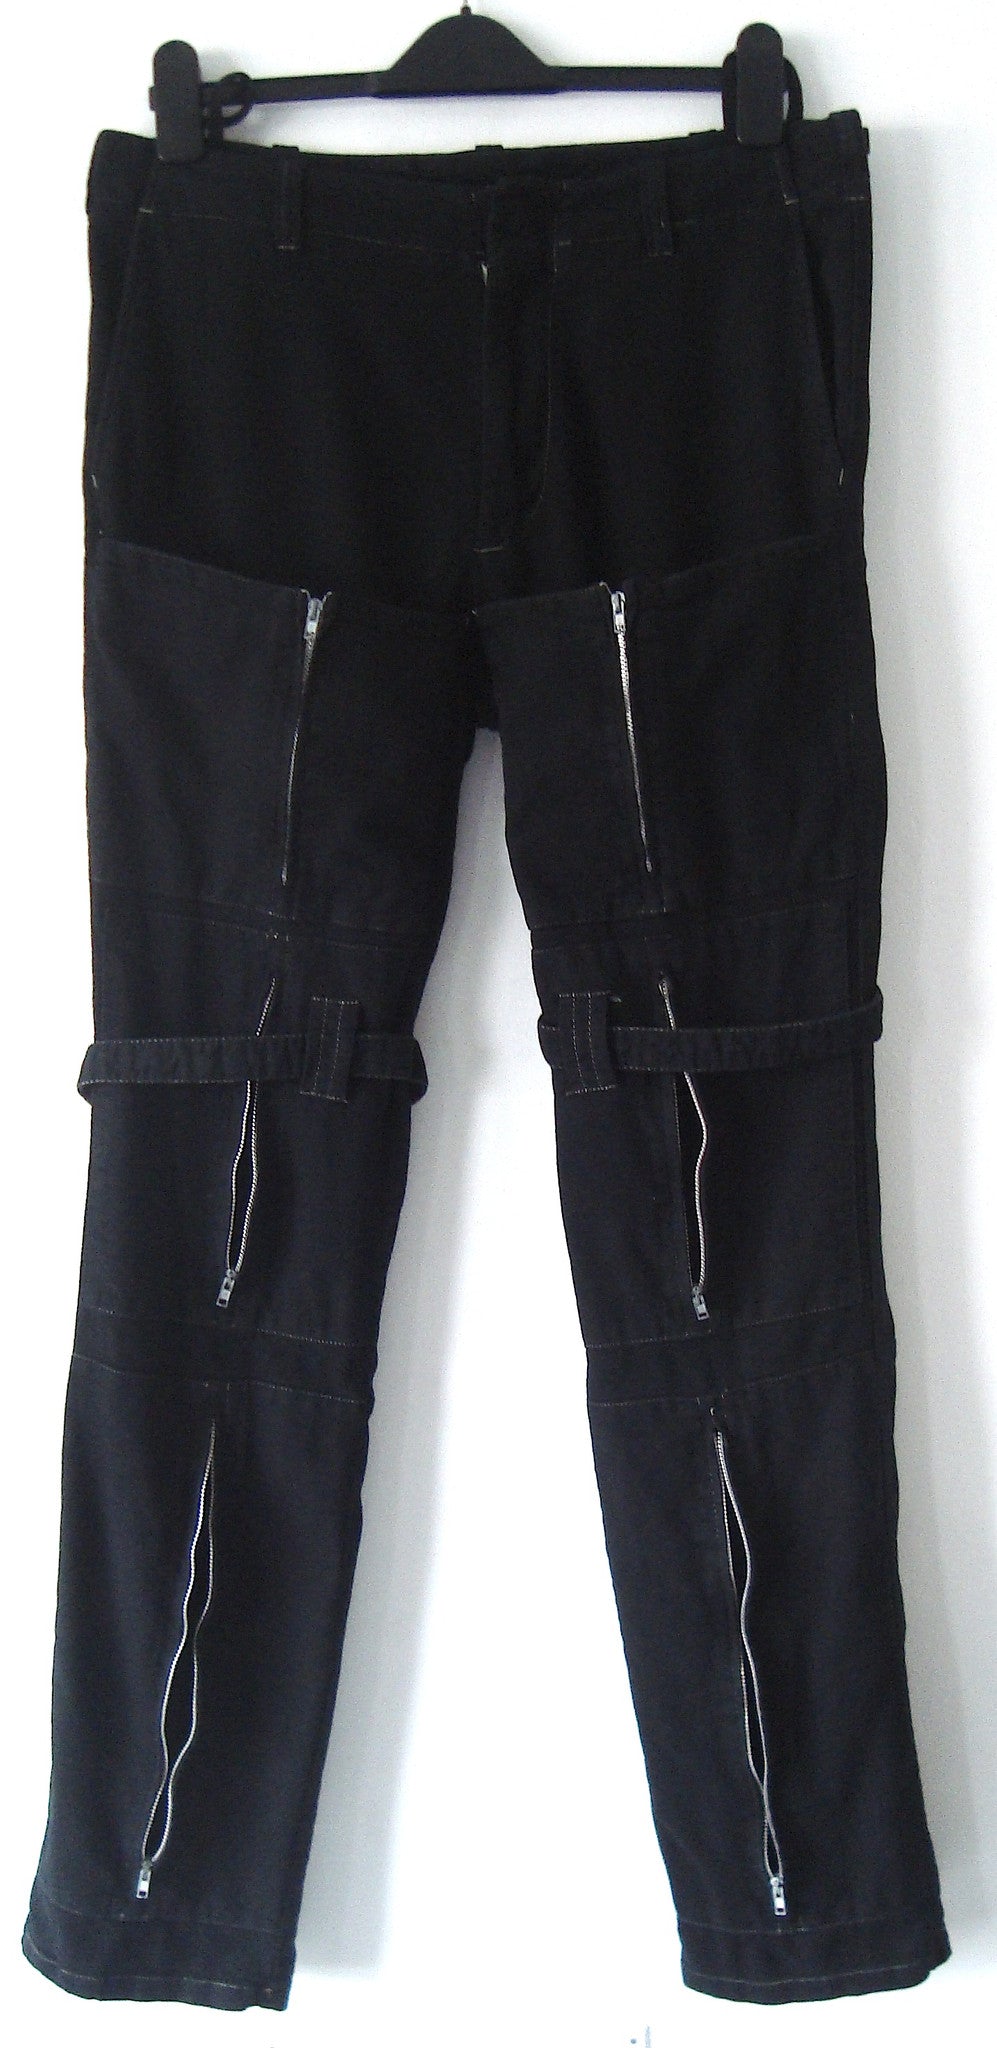 Helmut Lang 1999 Bondage Trousers with Zipped Pockets and Straps